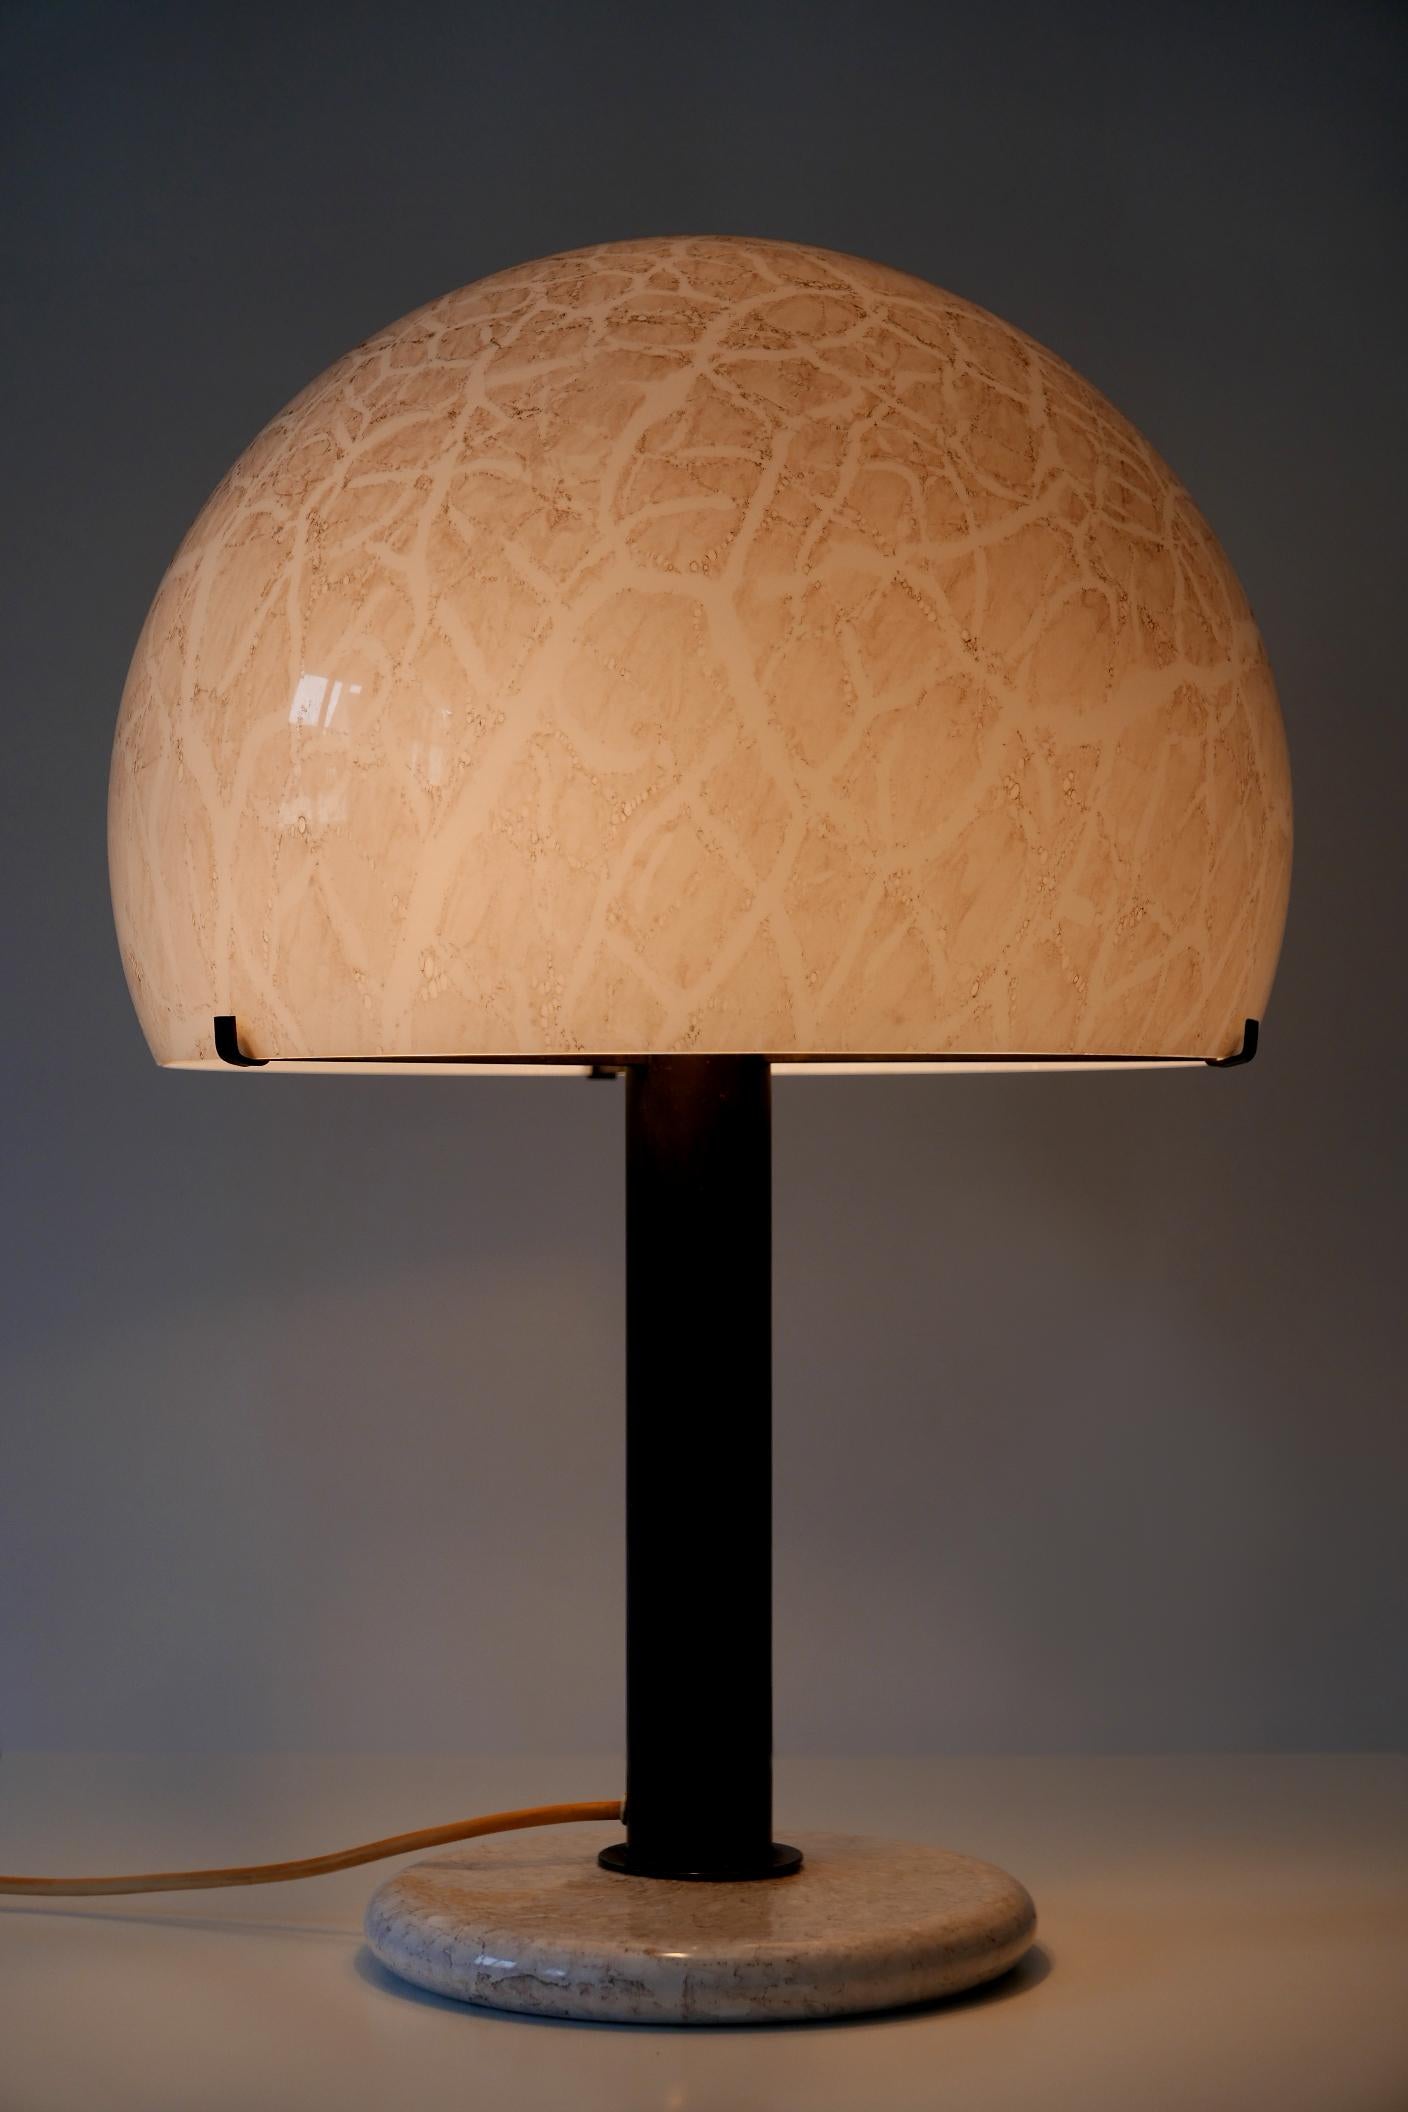 Extremely rare, large and elegant Mid-Century Modern Murano Glass table lamp. Designed by Ludovico Diaz de Santillana for Venini, 1960s, Murano, Italy.

Executed in Murano glass shade and base in Alabaster optic and bronze-patinated brass, the lamp